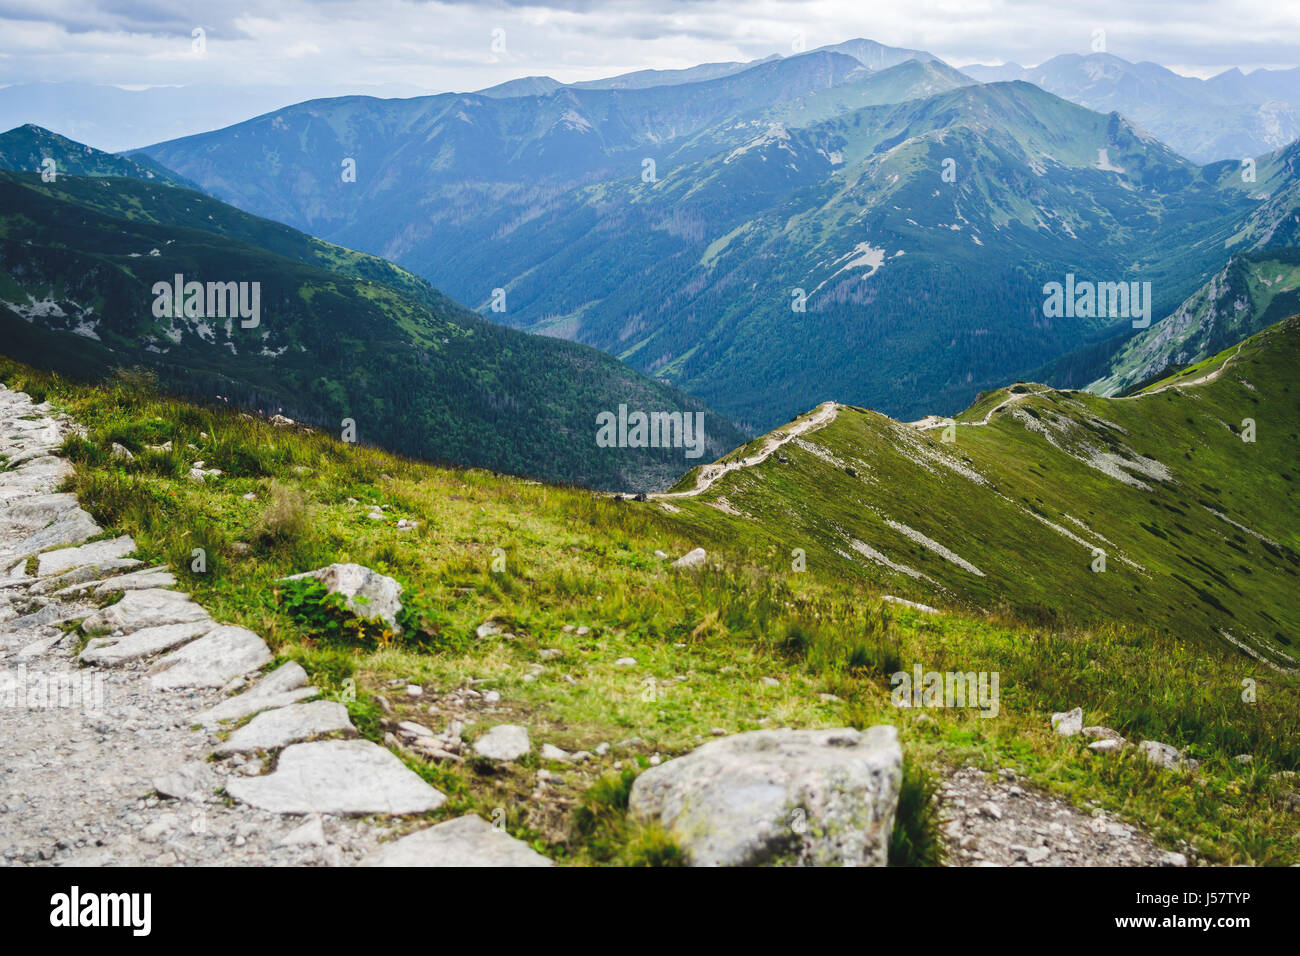 Hiking trail in the Tatra mountains in summer seen from the Kasprowy Wierch. Stock Photo